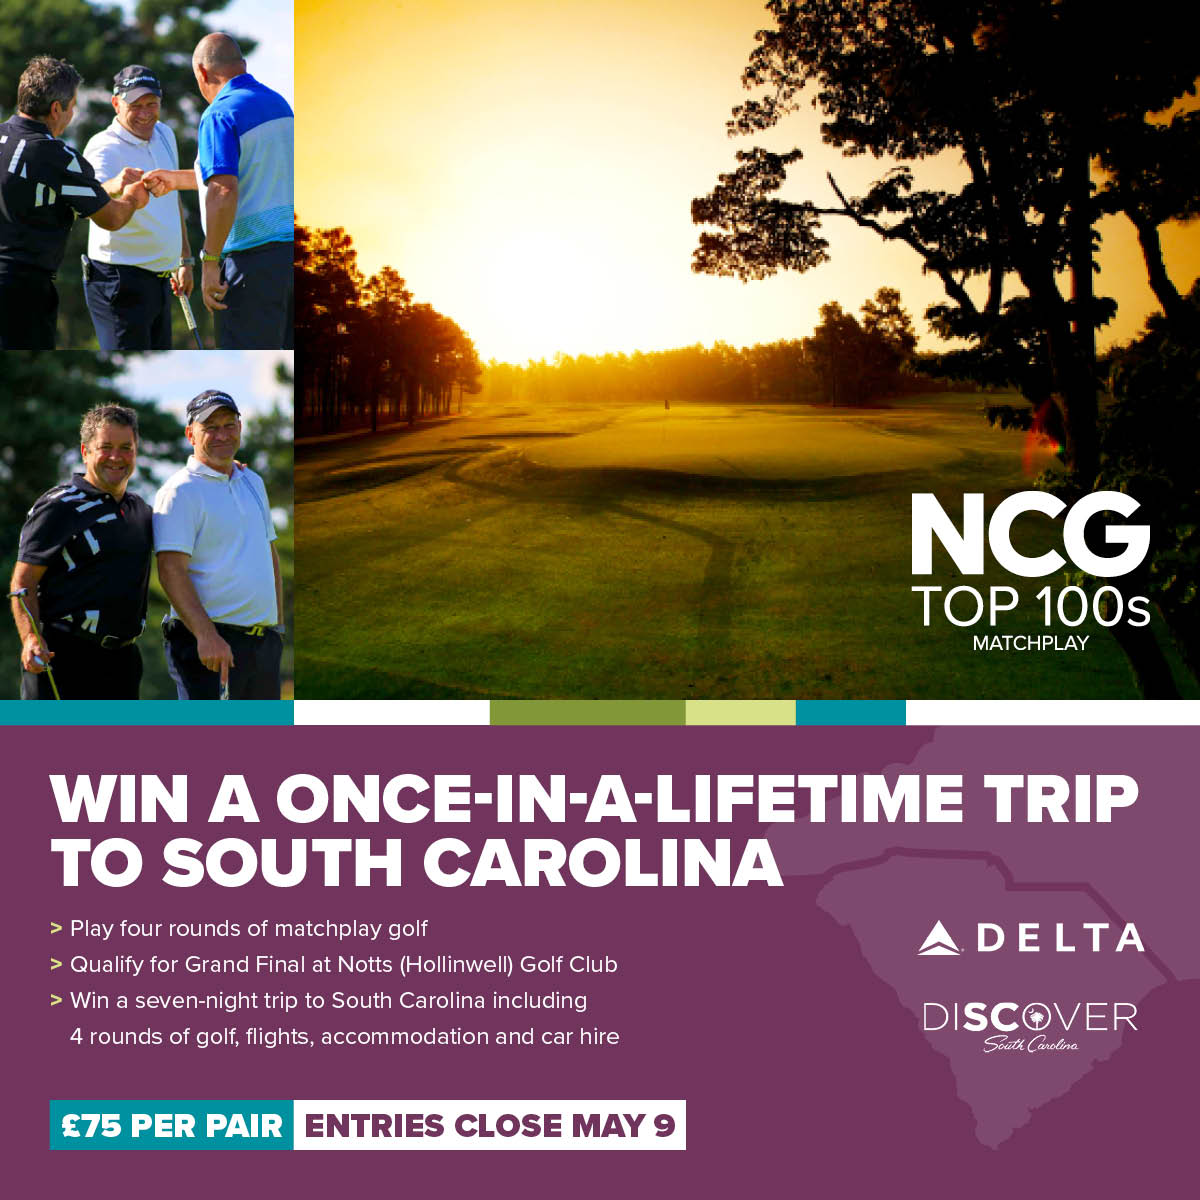 One month to go to enter our Summer Matchplay ⏳ 🤝 Pairs competition 🥊 Four rounds of knockout golf ⛳ Grand Final at Hollinwell 🇺🇸 Winners receive seven-night golf trip to South Carolina Enter now: ow.ly/Ww6H50Rbemp